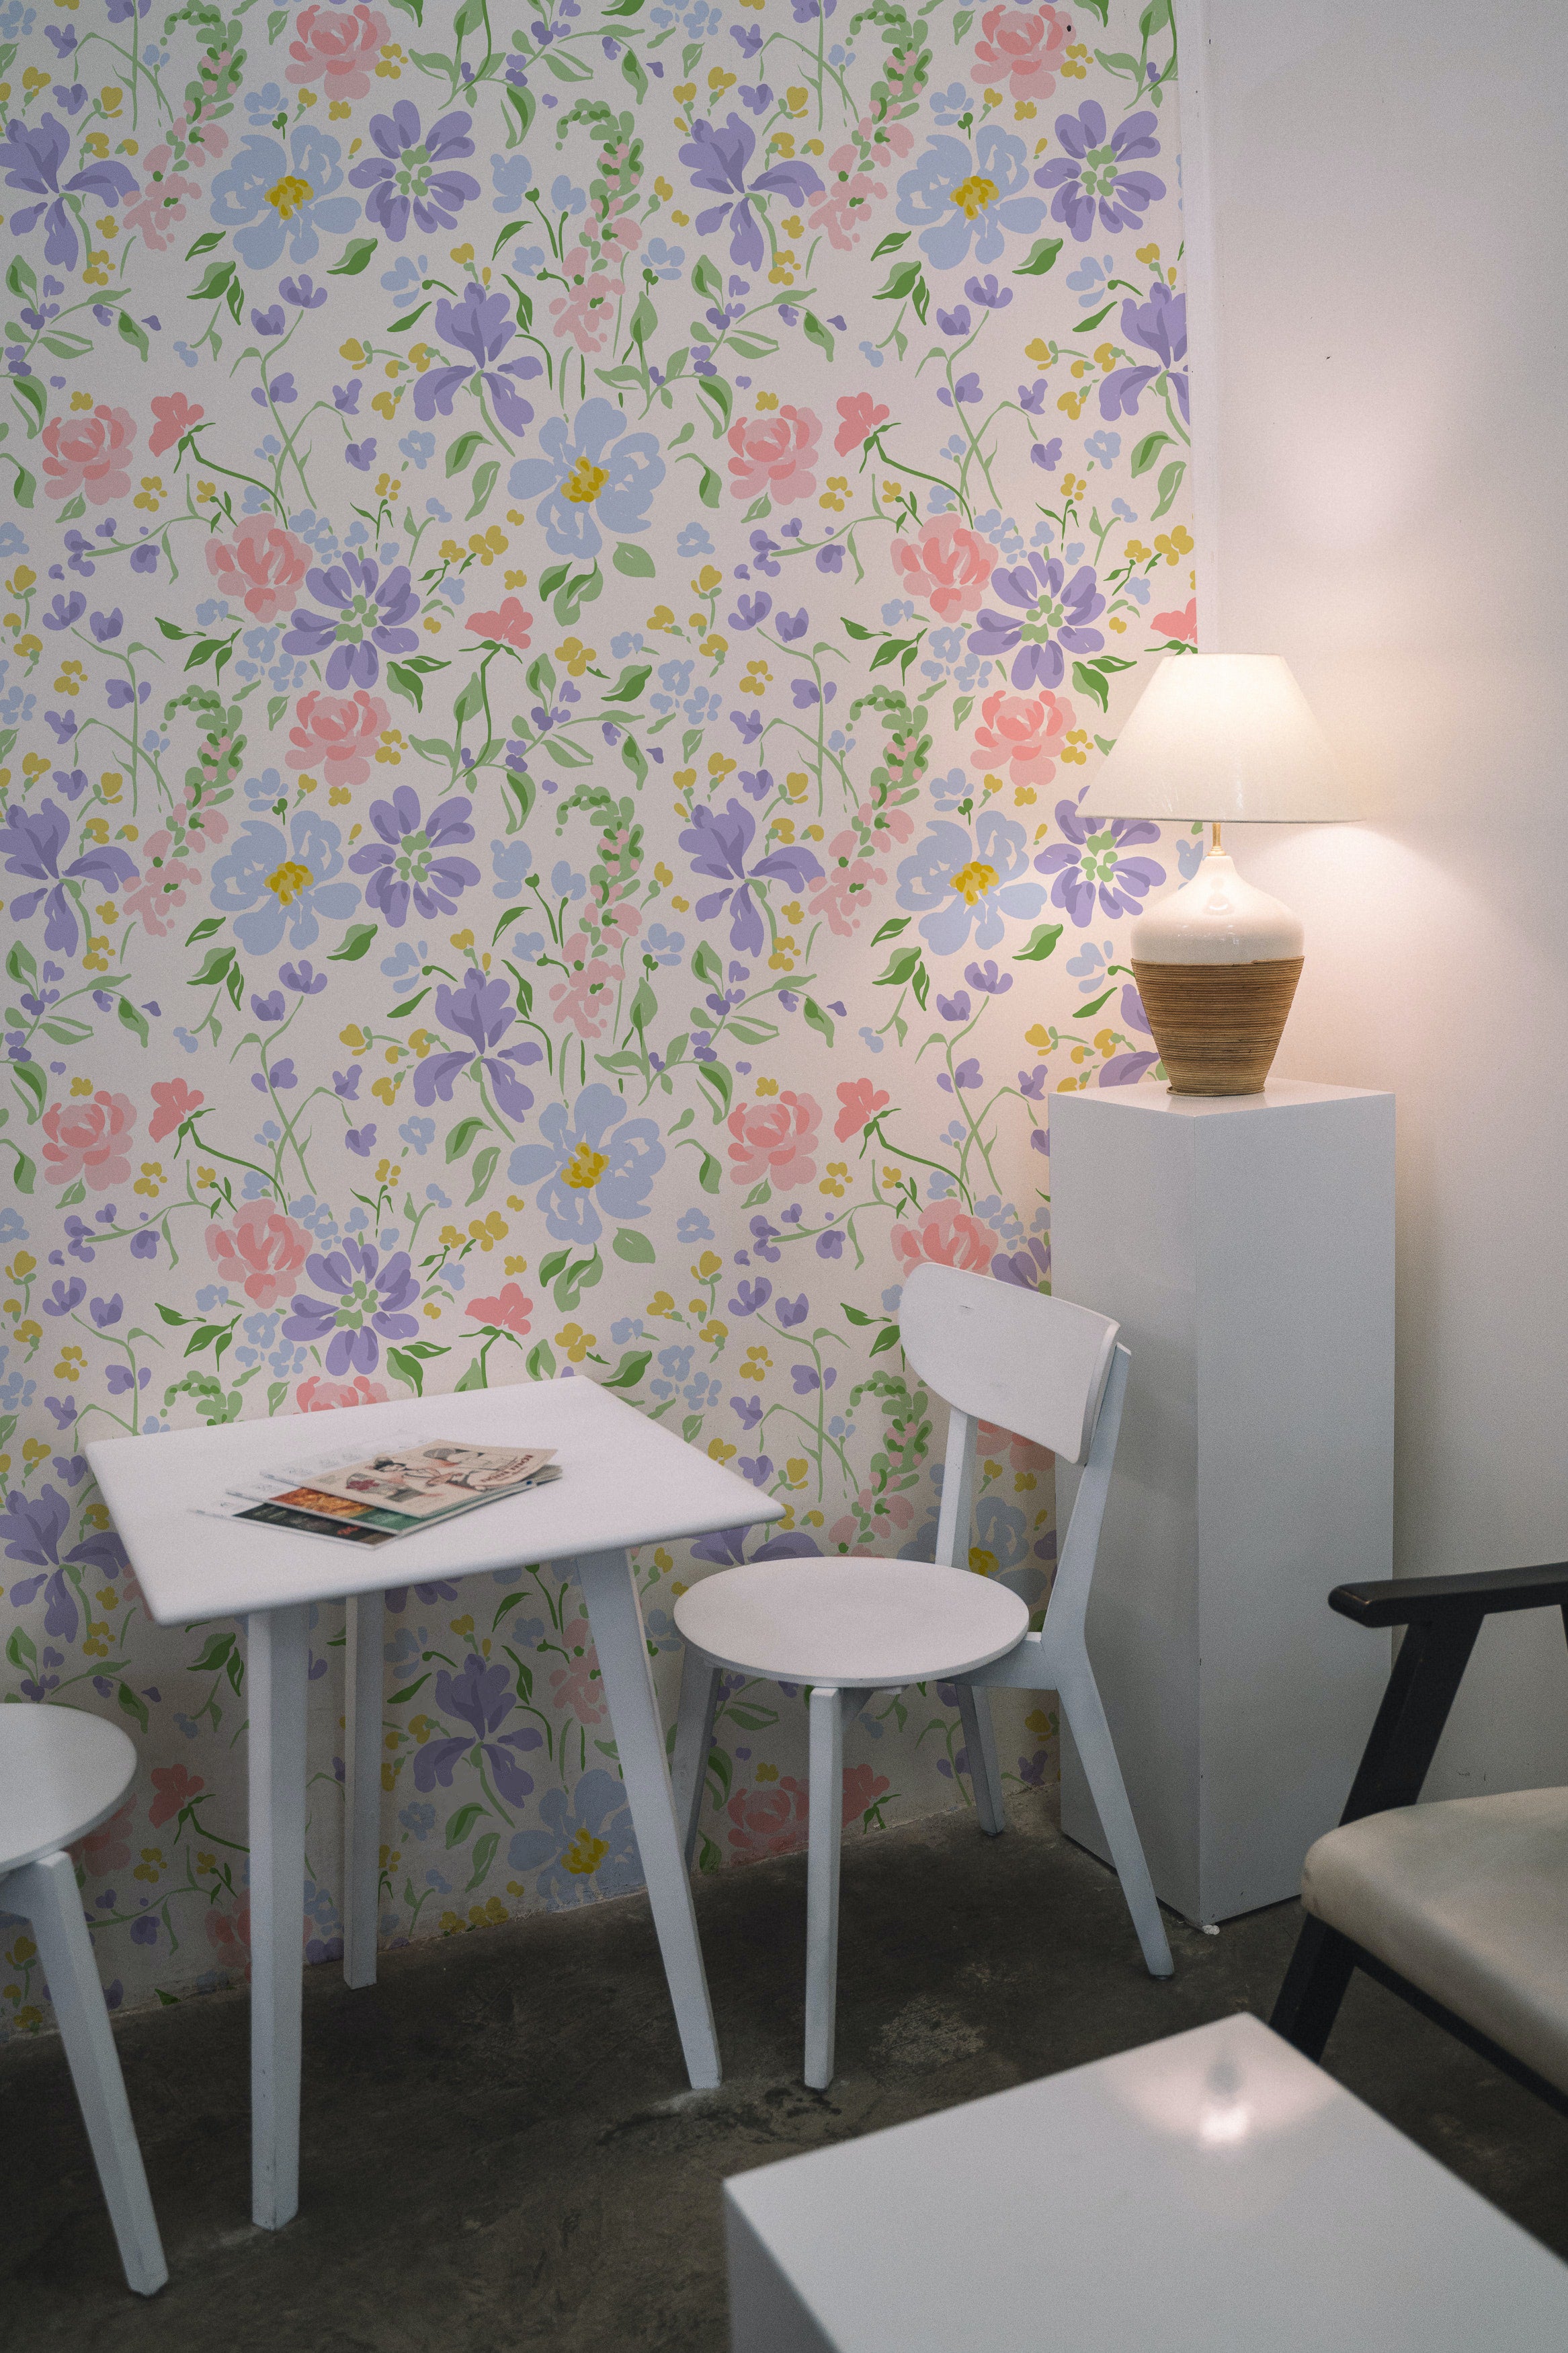 A simple yet stylish workspace with Romana Wallpaper, adorned with an array of colorful flowers in pink, blue, and yellow. A white table and chairs set against the floral backdrop creates a bright and airy study area